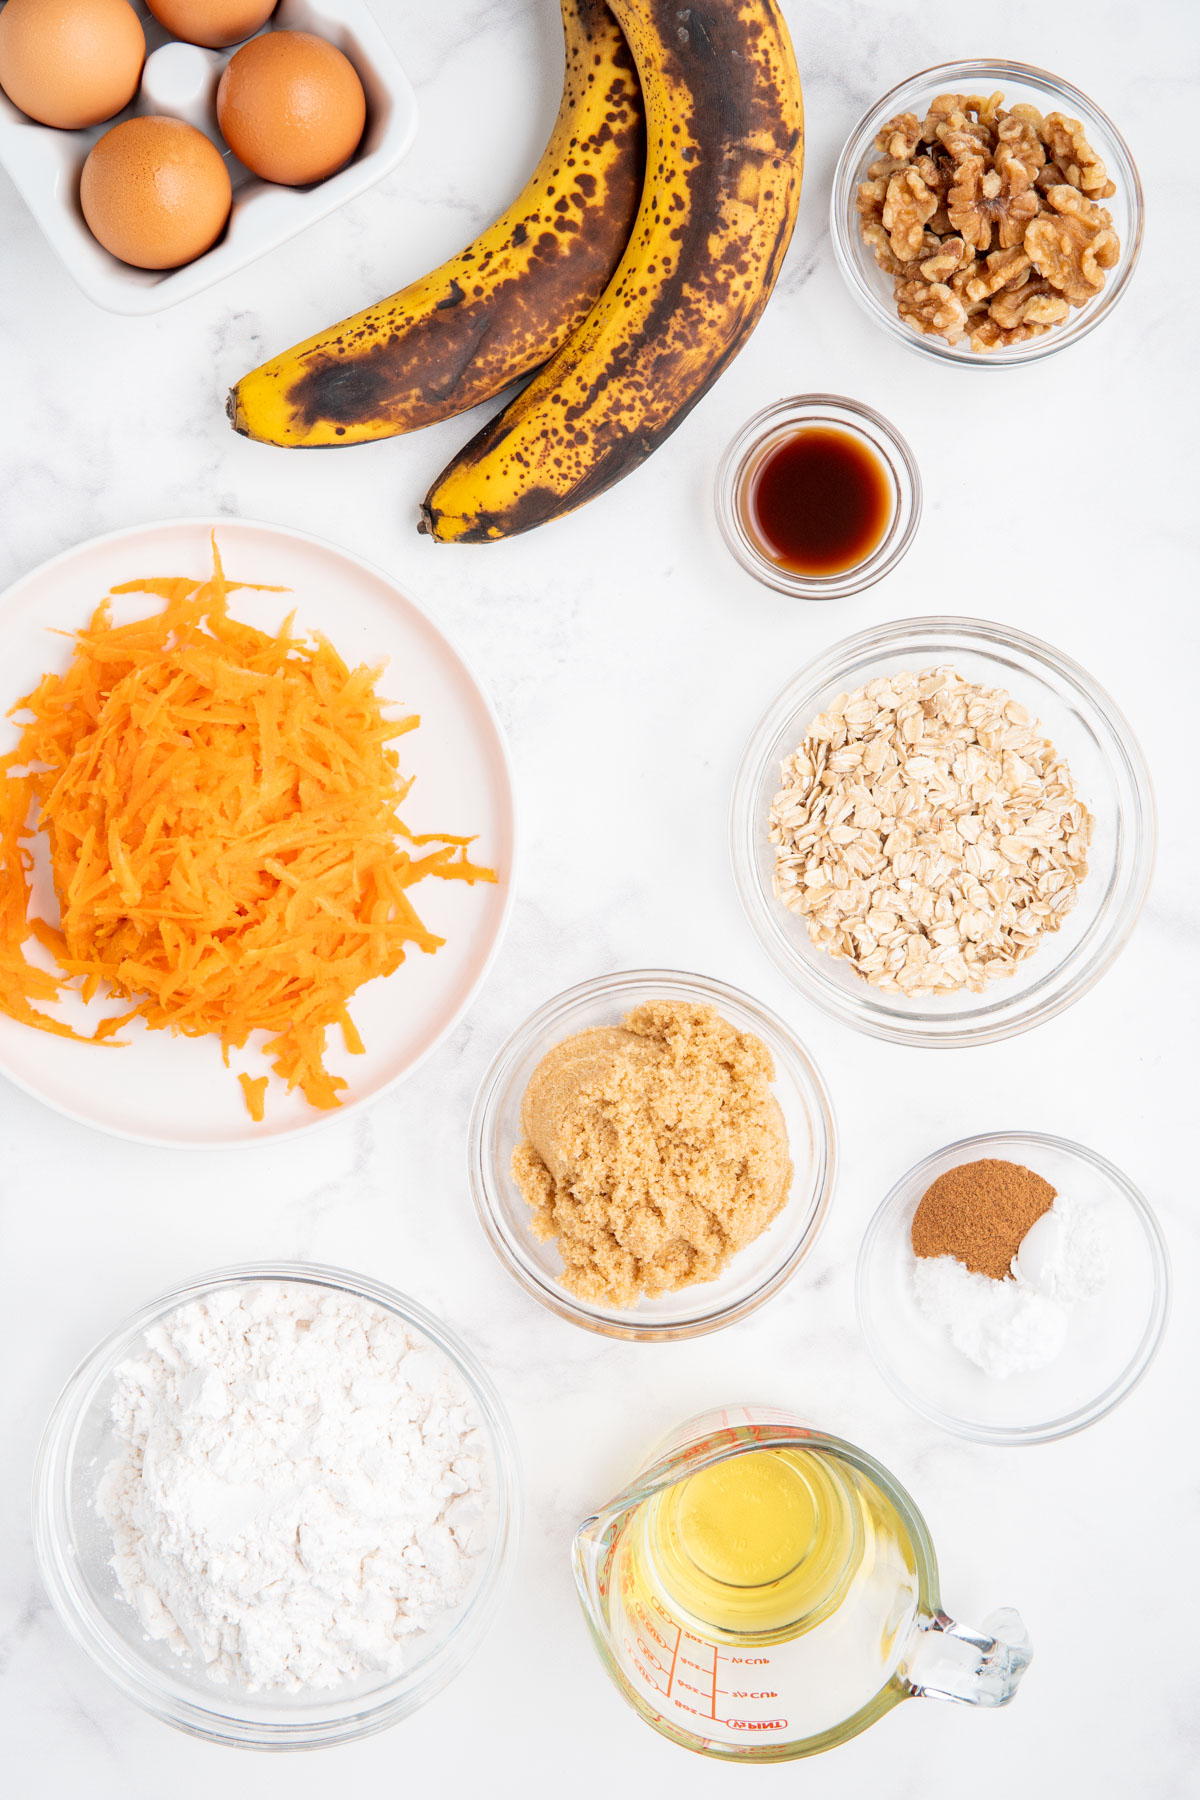 Ingredients needed to make carrot banana muffins with oats.